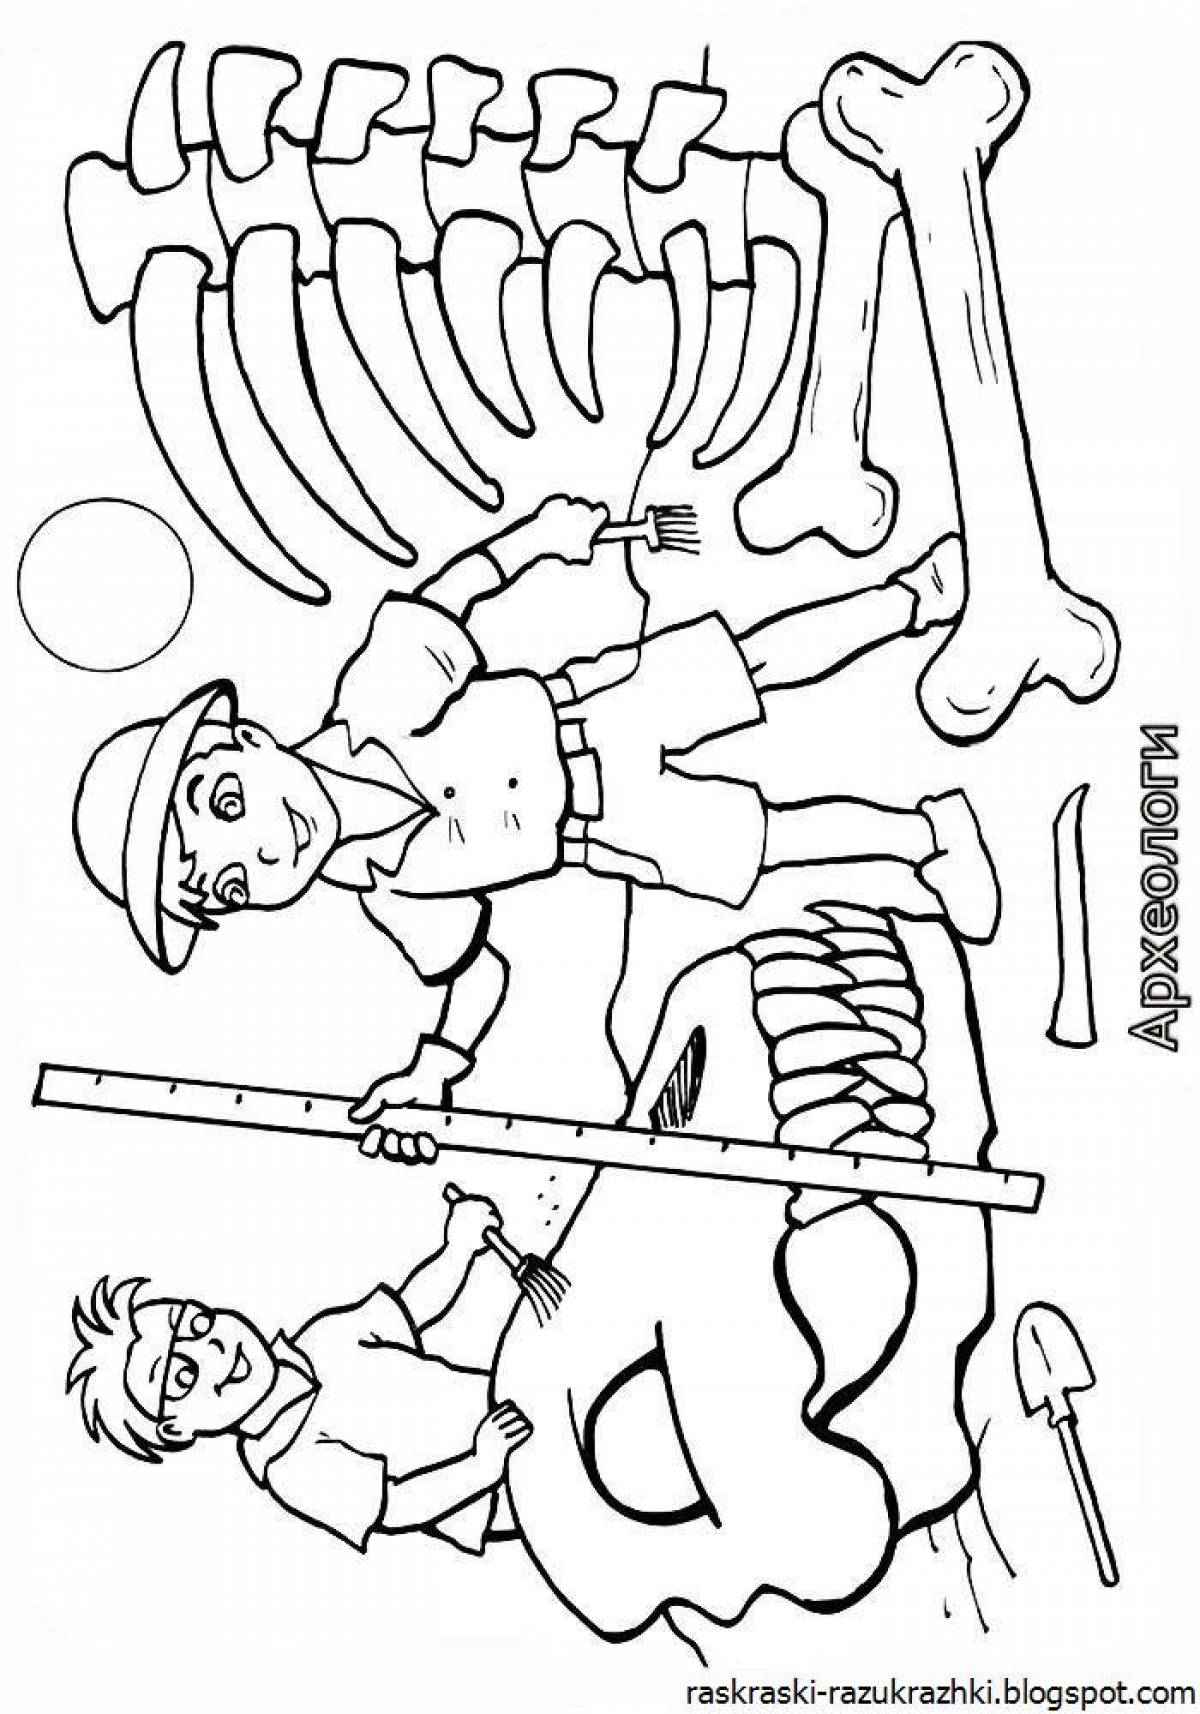 Colorful profession coloring book for children 5-6 years old